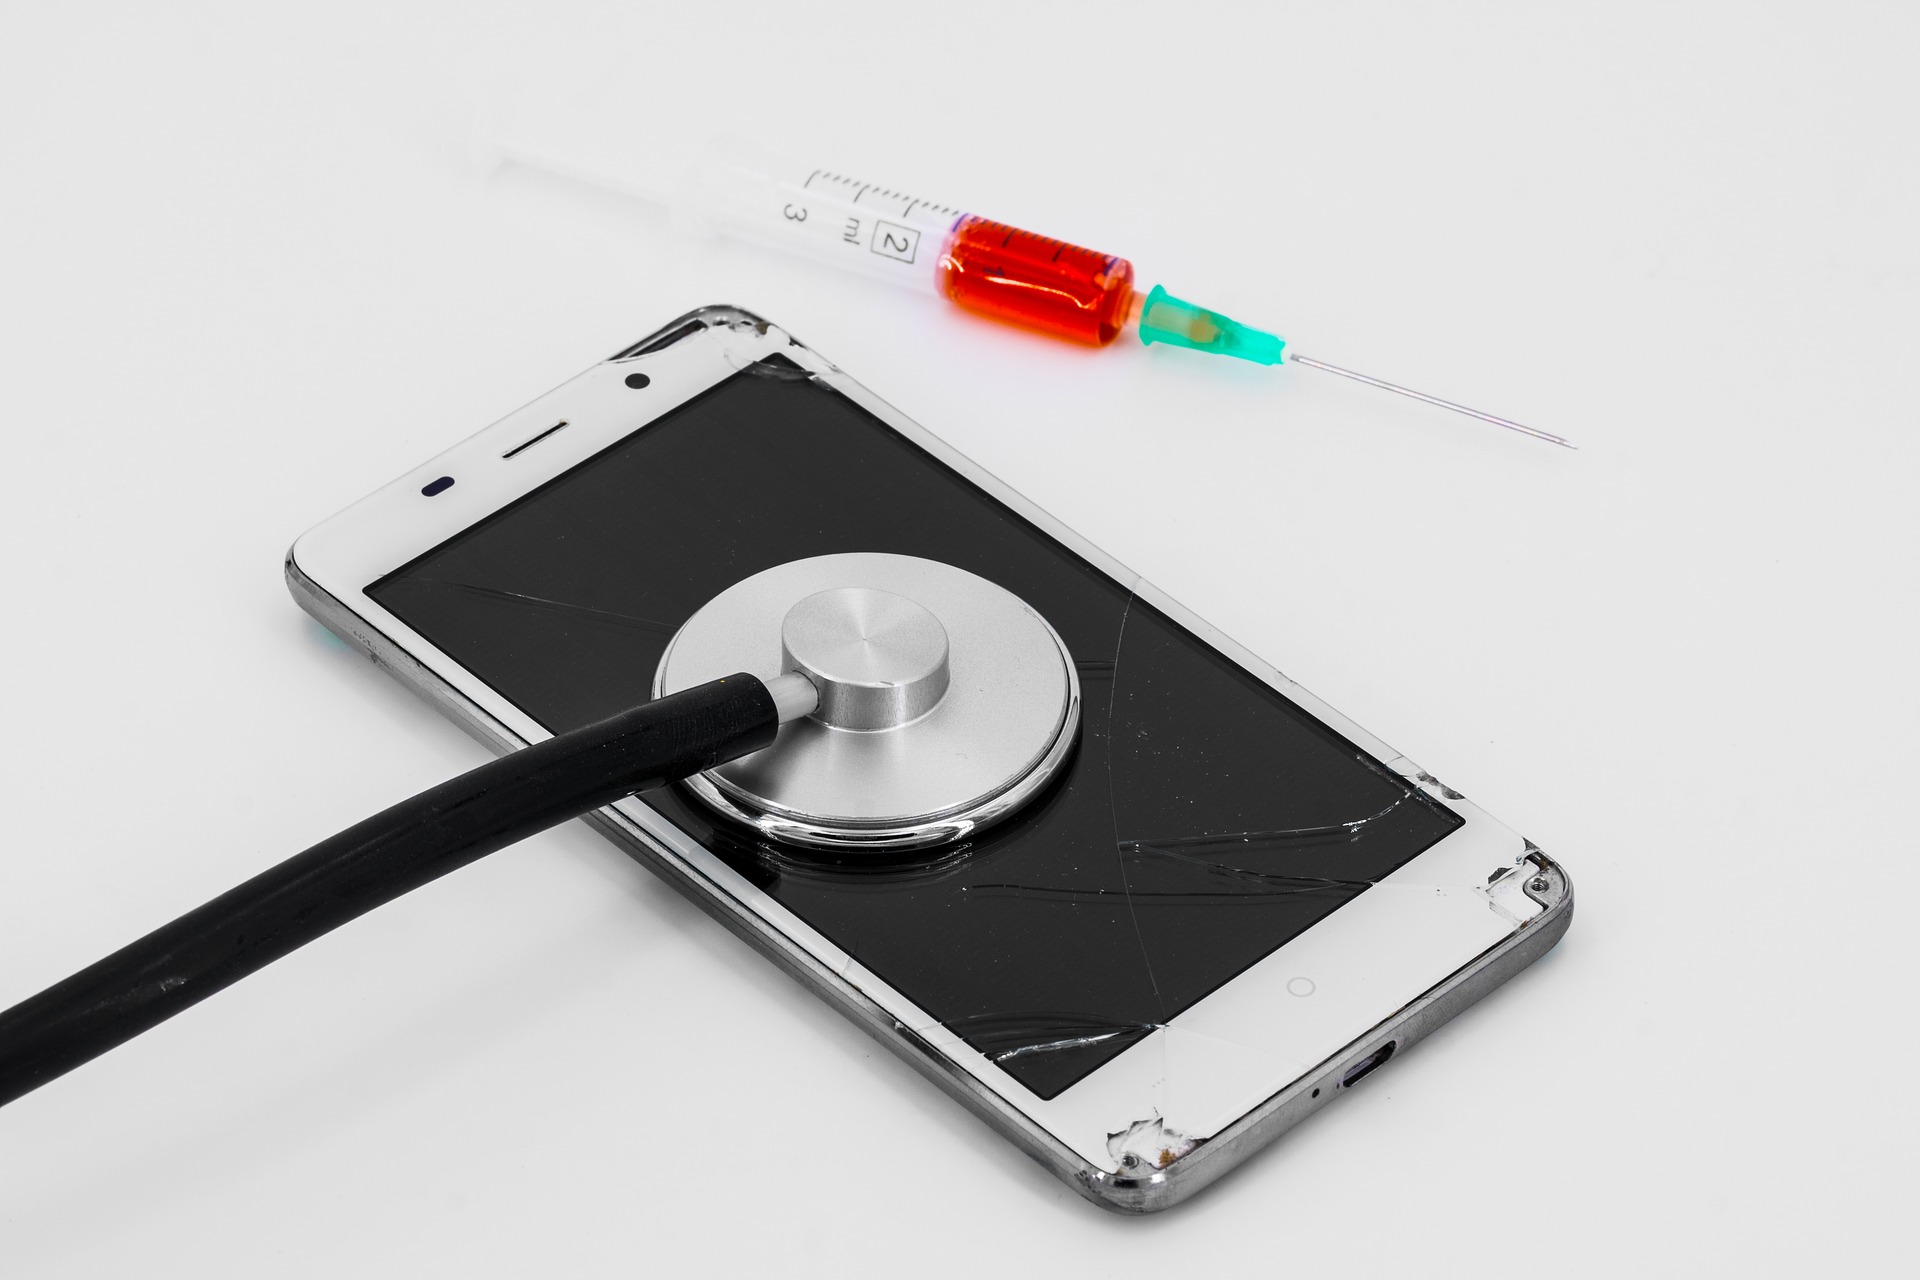 Benefits of repairing a damaged mobile phone